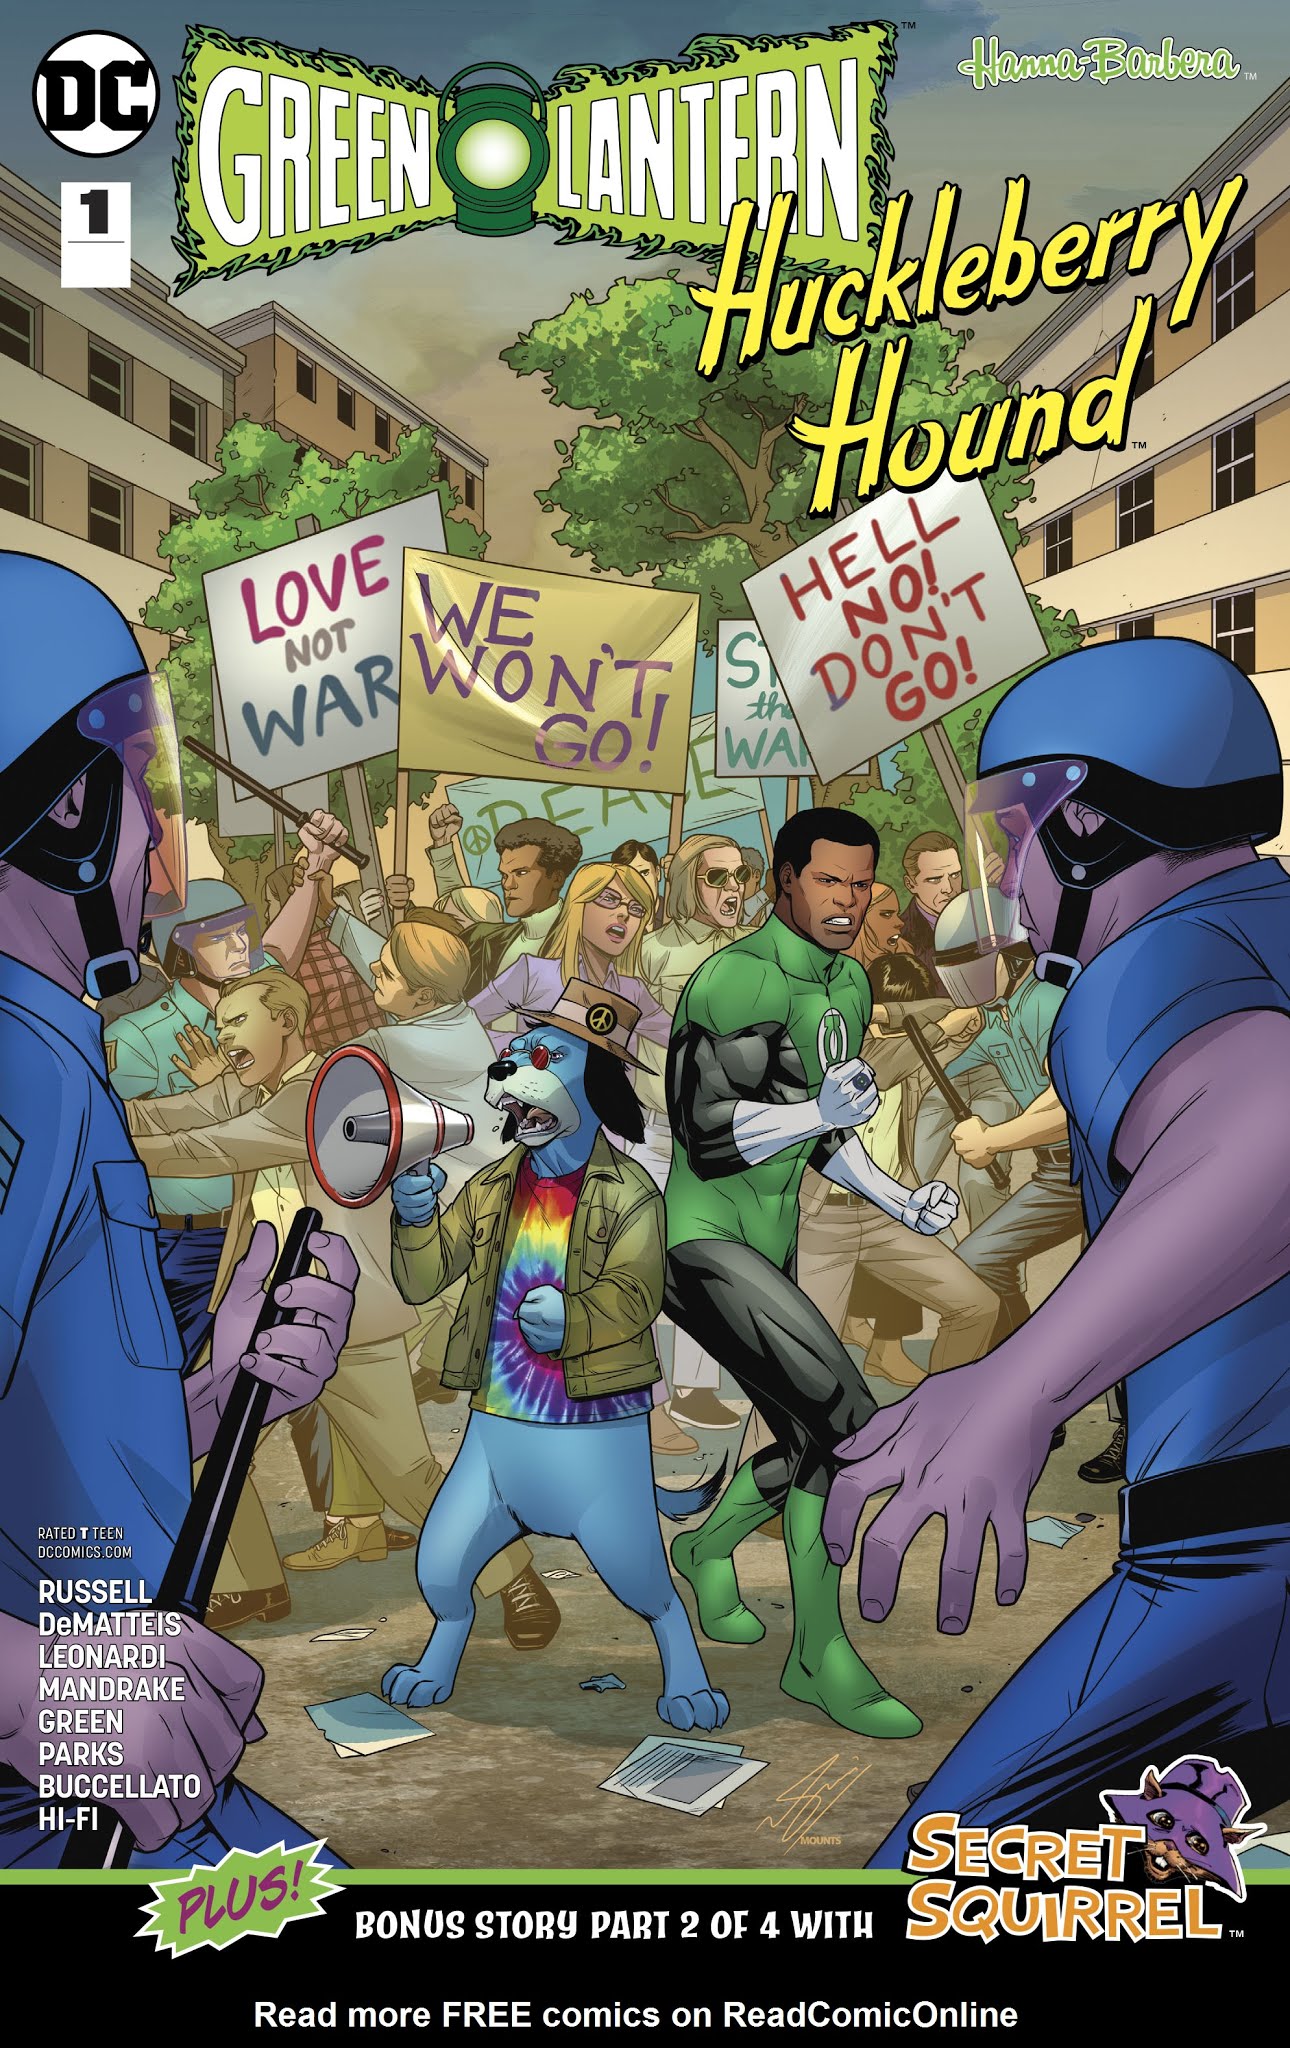 Read online Green Lantern/Huckleberry Hound Special comic -  Issue # Full - 1